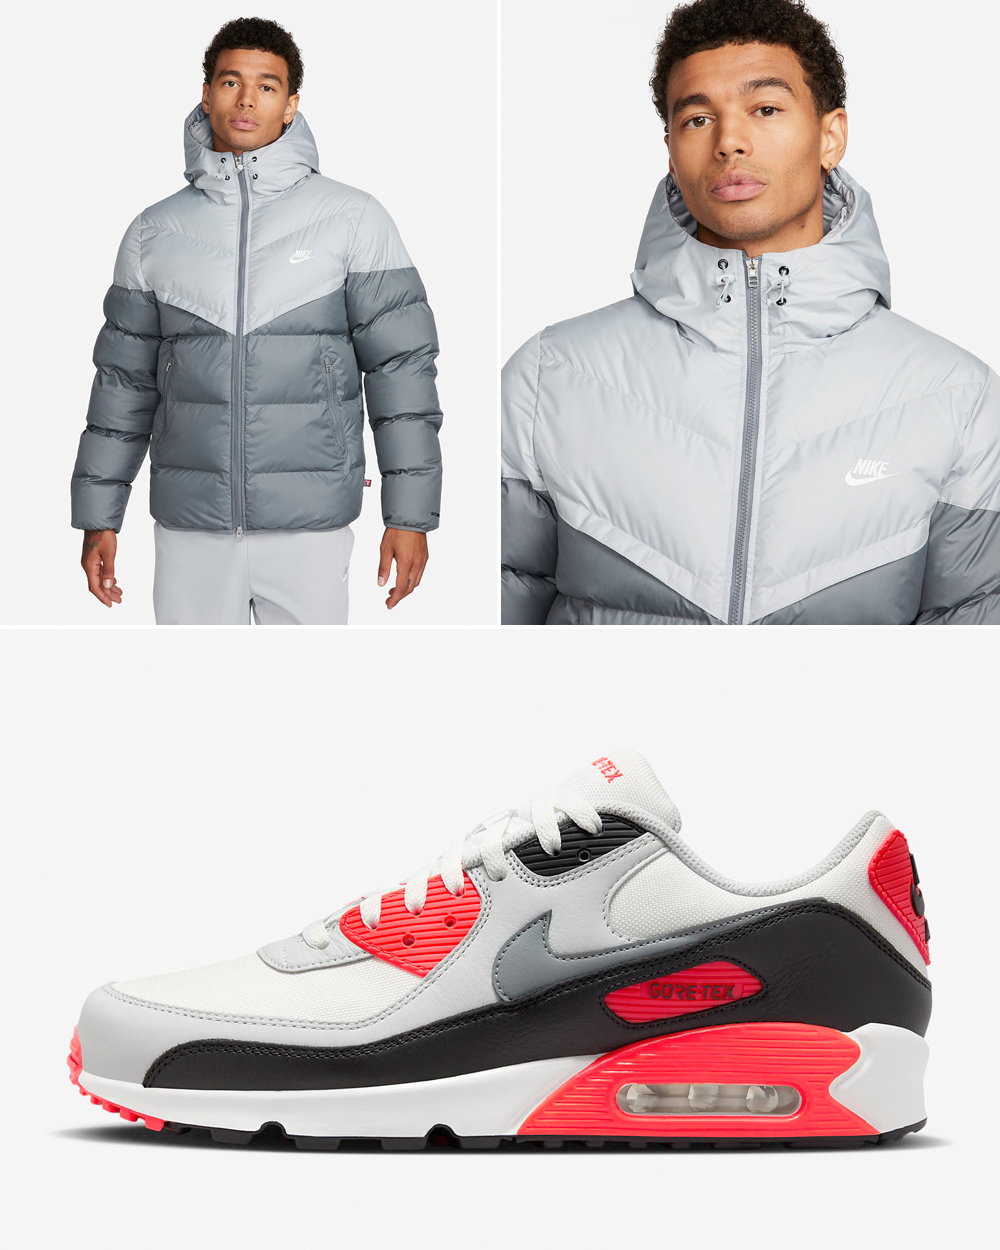 Nike-Air-Max-90-Gore-Tex-Infrared-Jacket-Matching-Outfit